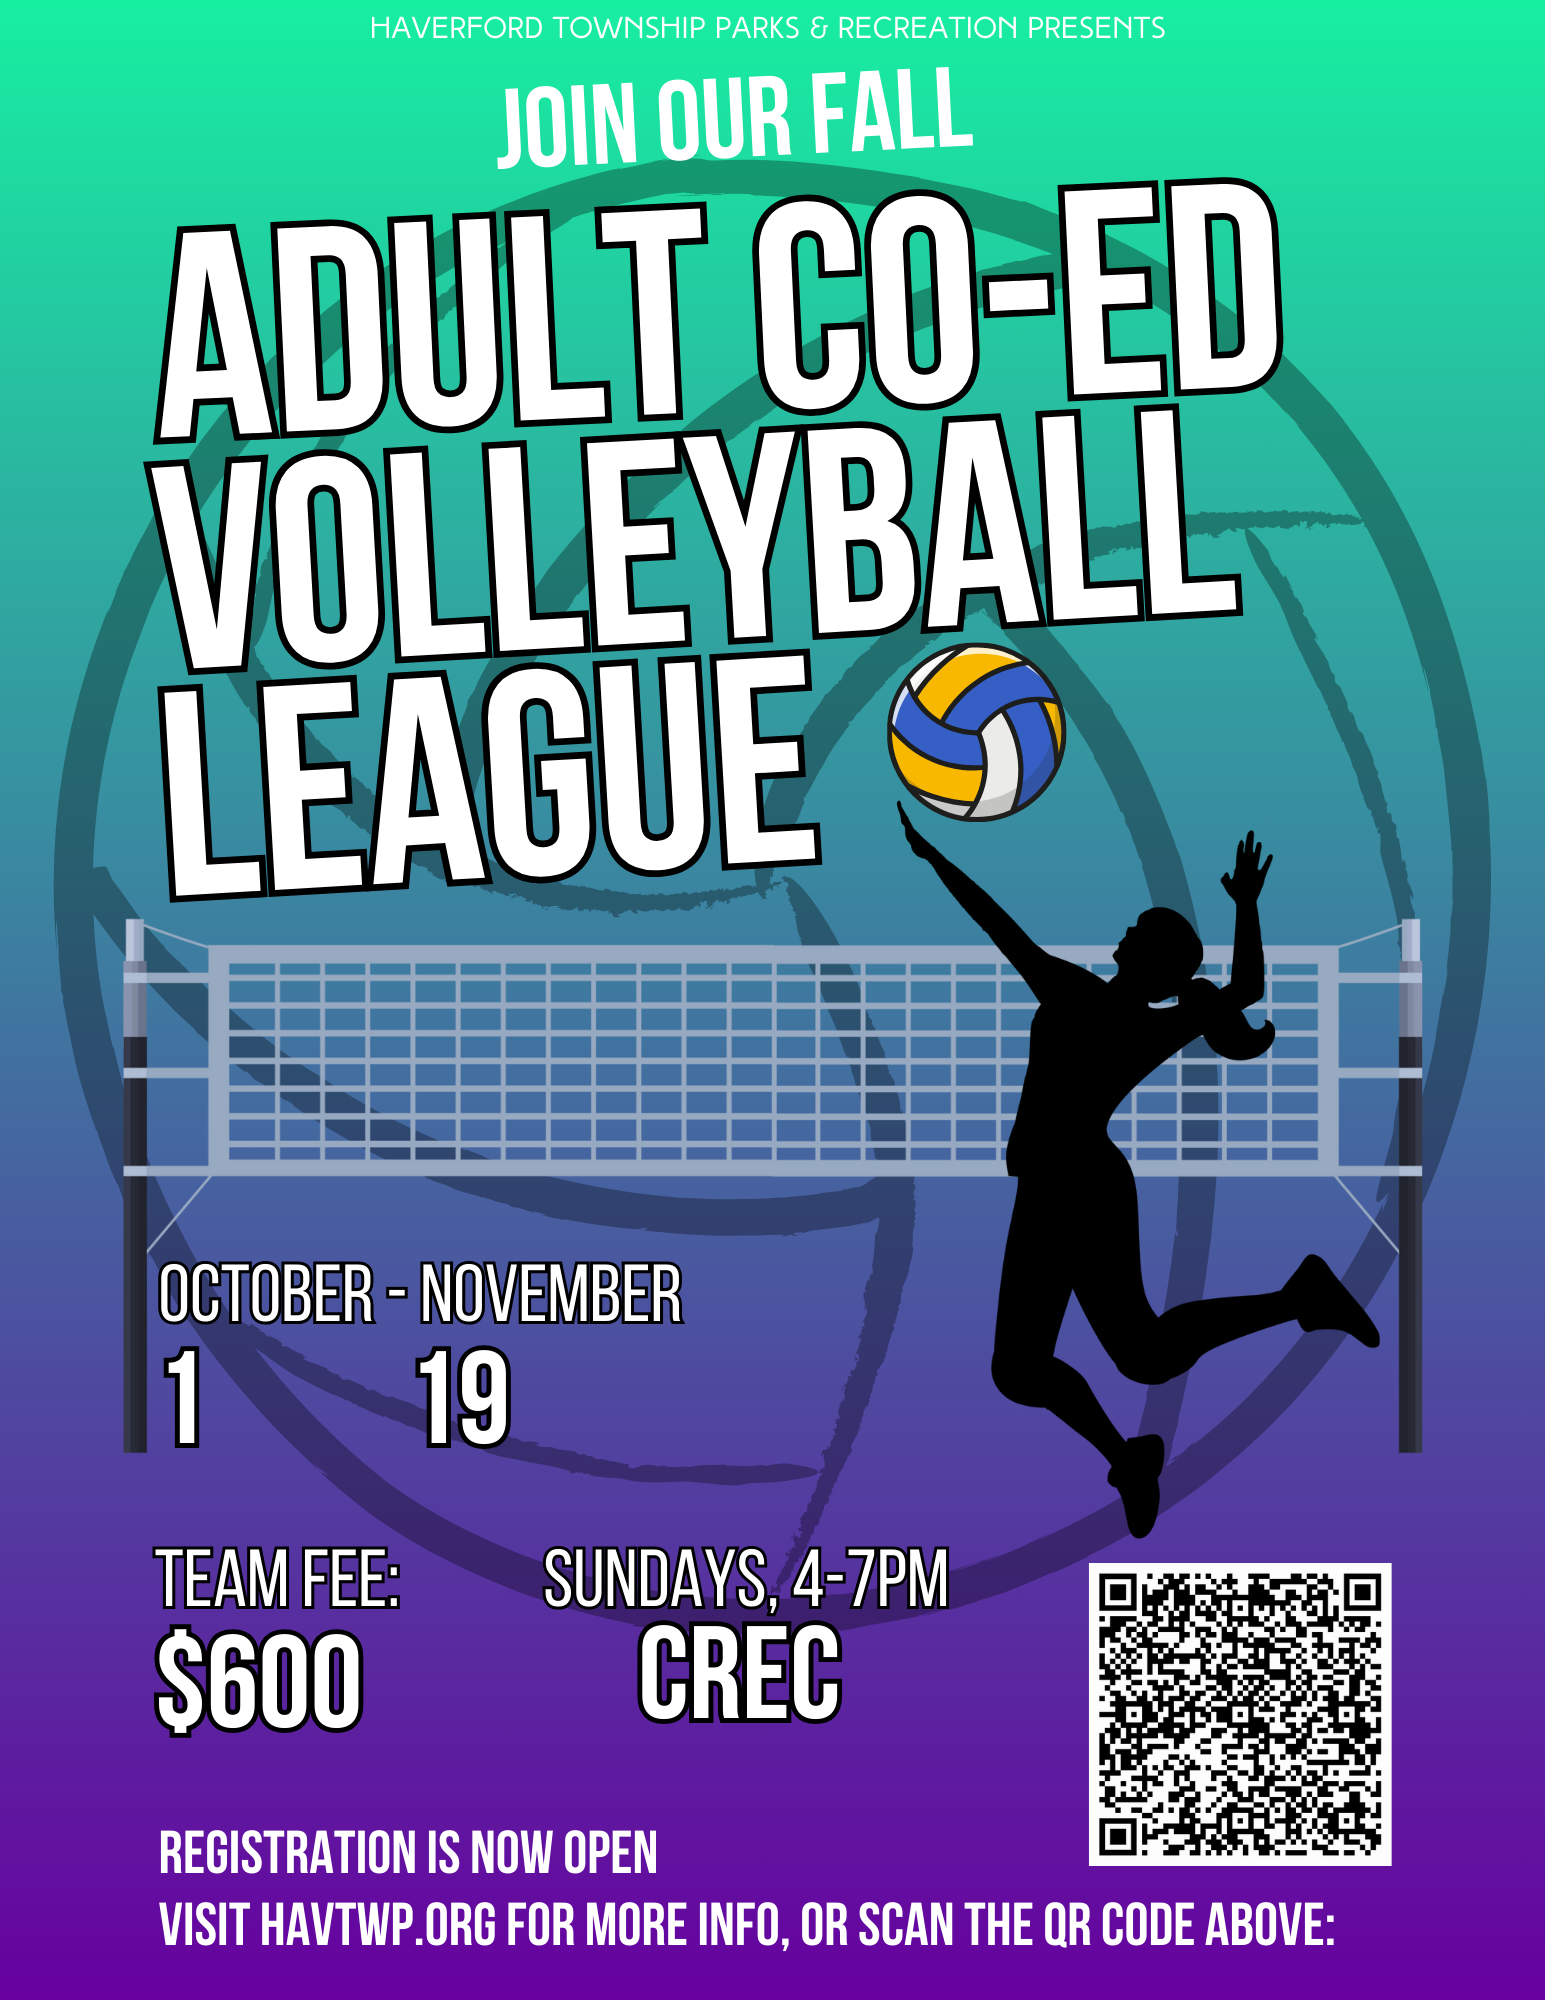 Adult Volleyball League